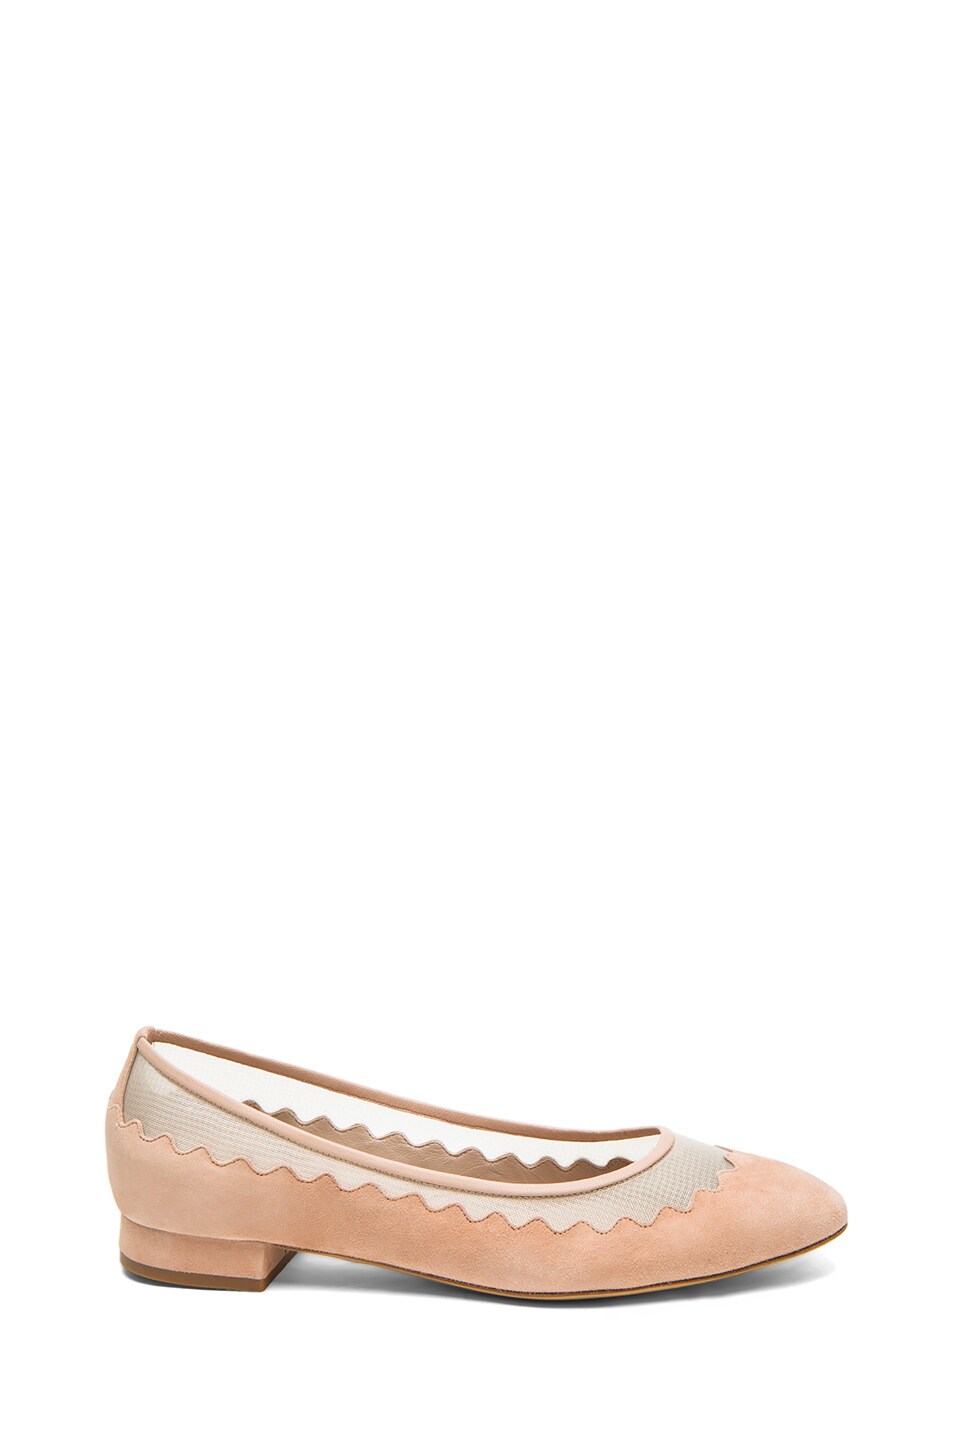 Image 1 of Chloe Suede Scalloped Flats with Mesh in Toulle